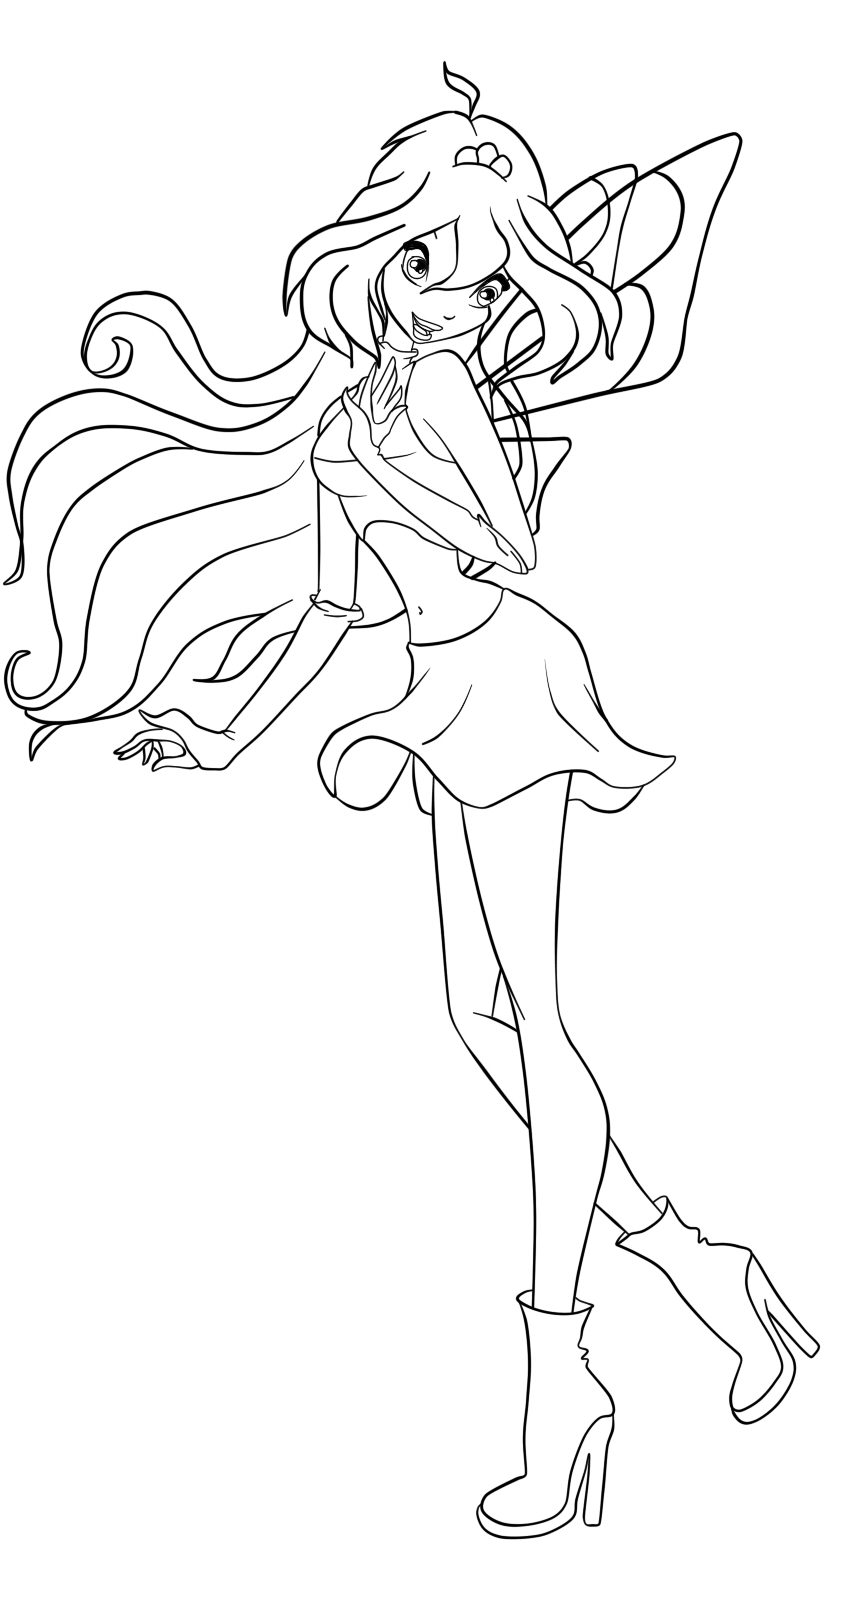 Winx Club Bloom Sirenix Coloring Pages Sketch Coloring Page